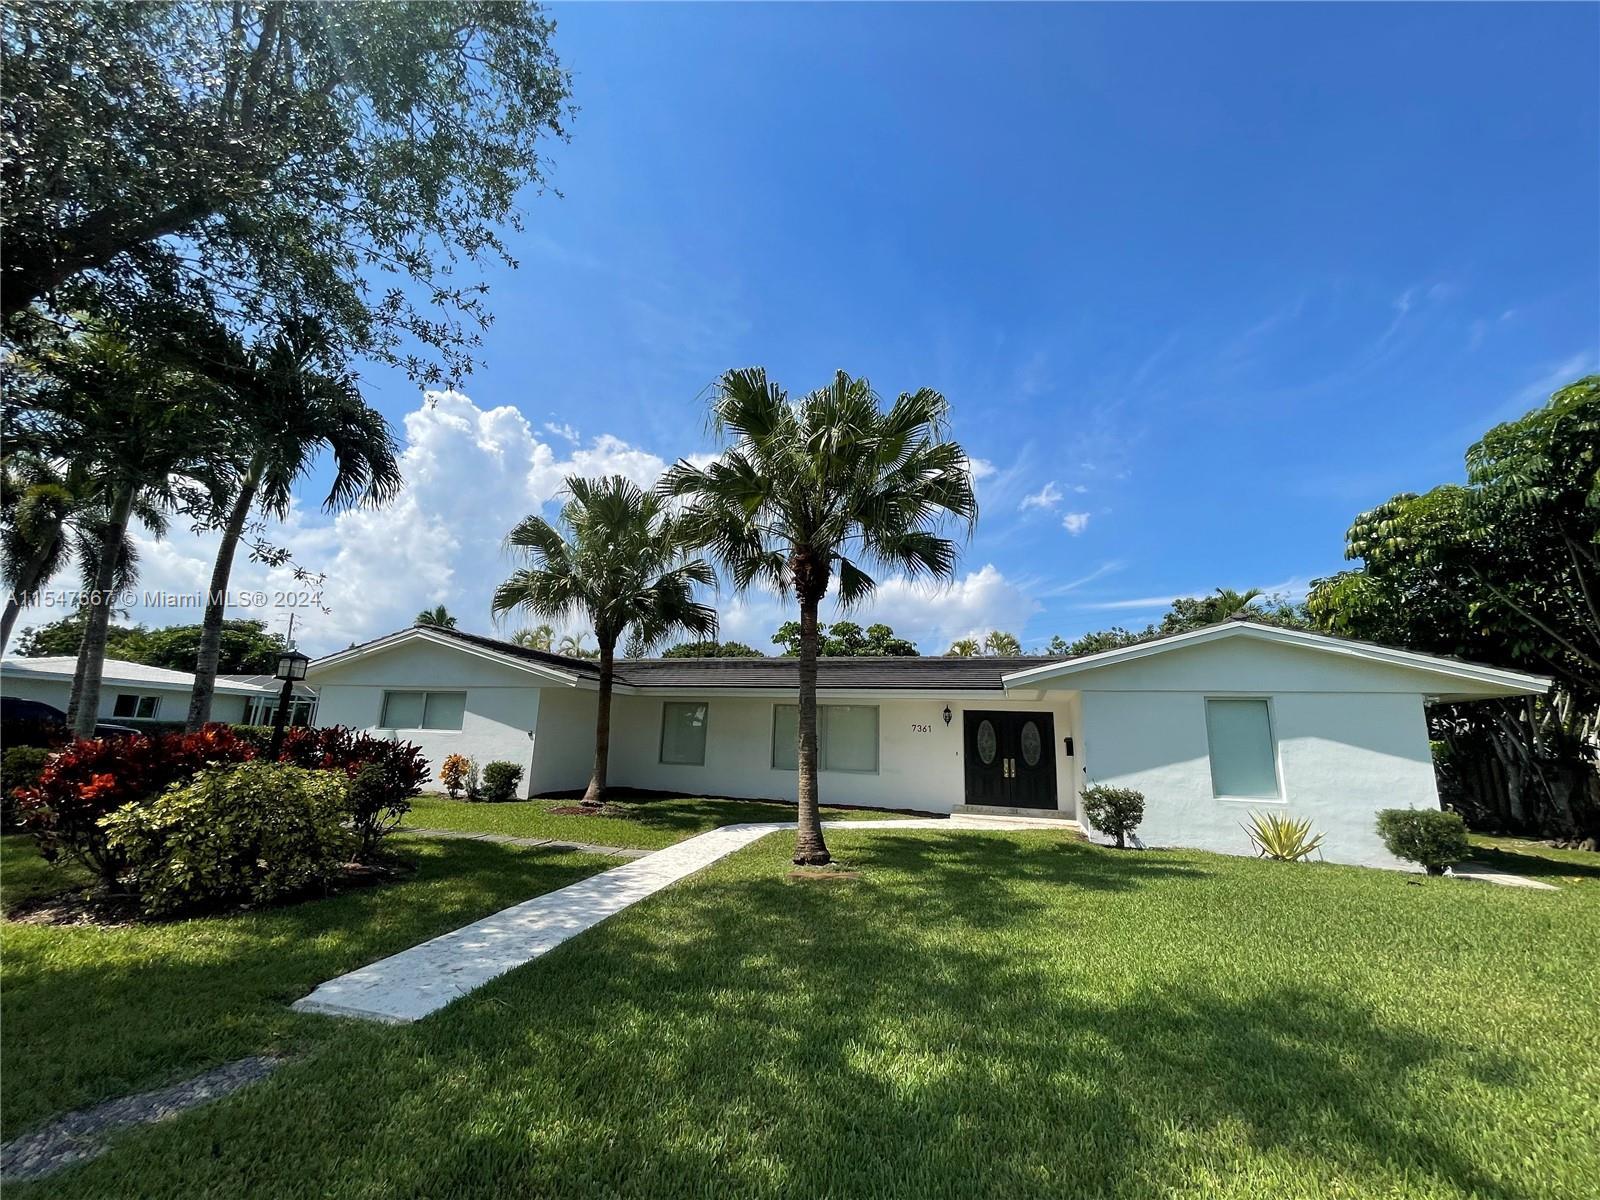 Photo of 7361 SW 117 Ter in Pinecrest, FL